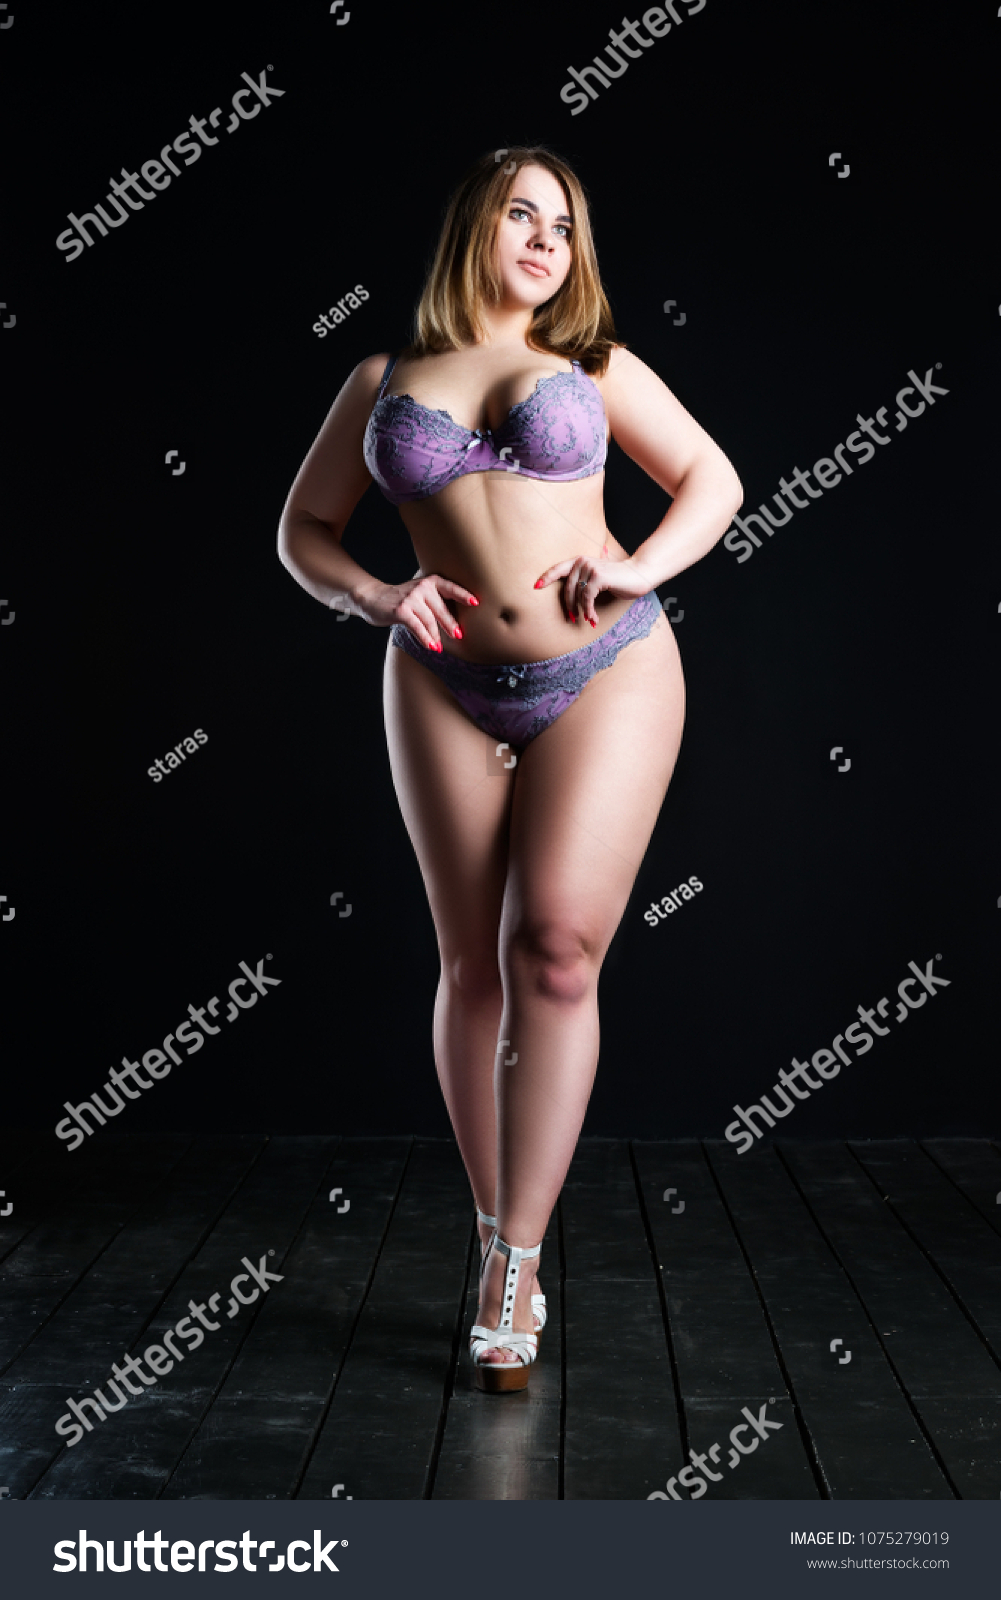 Obese girls sexy Fit to